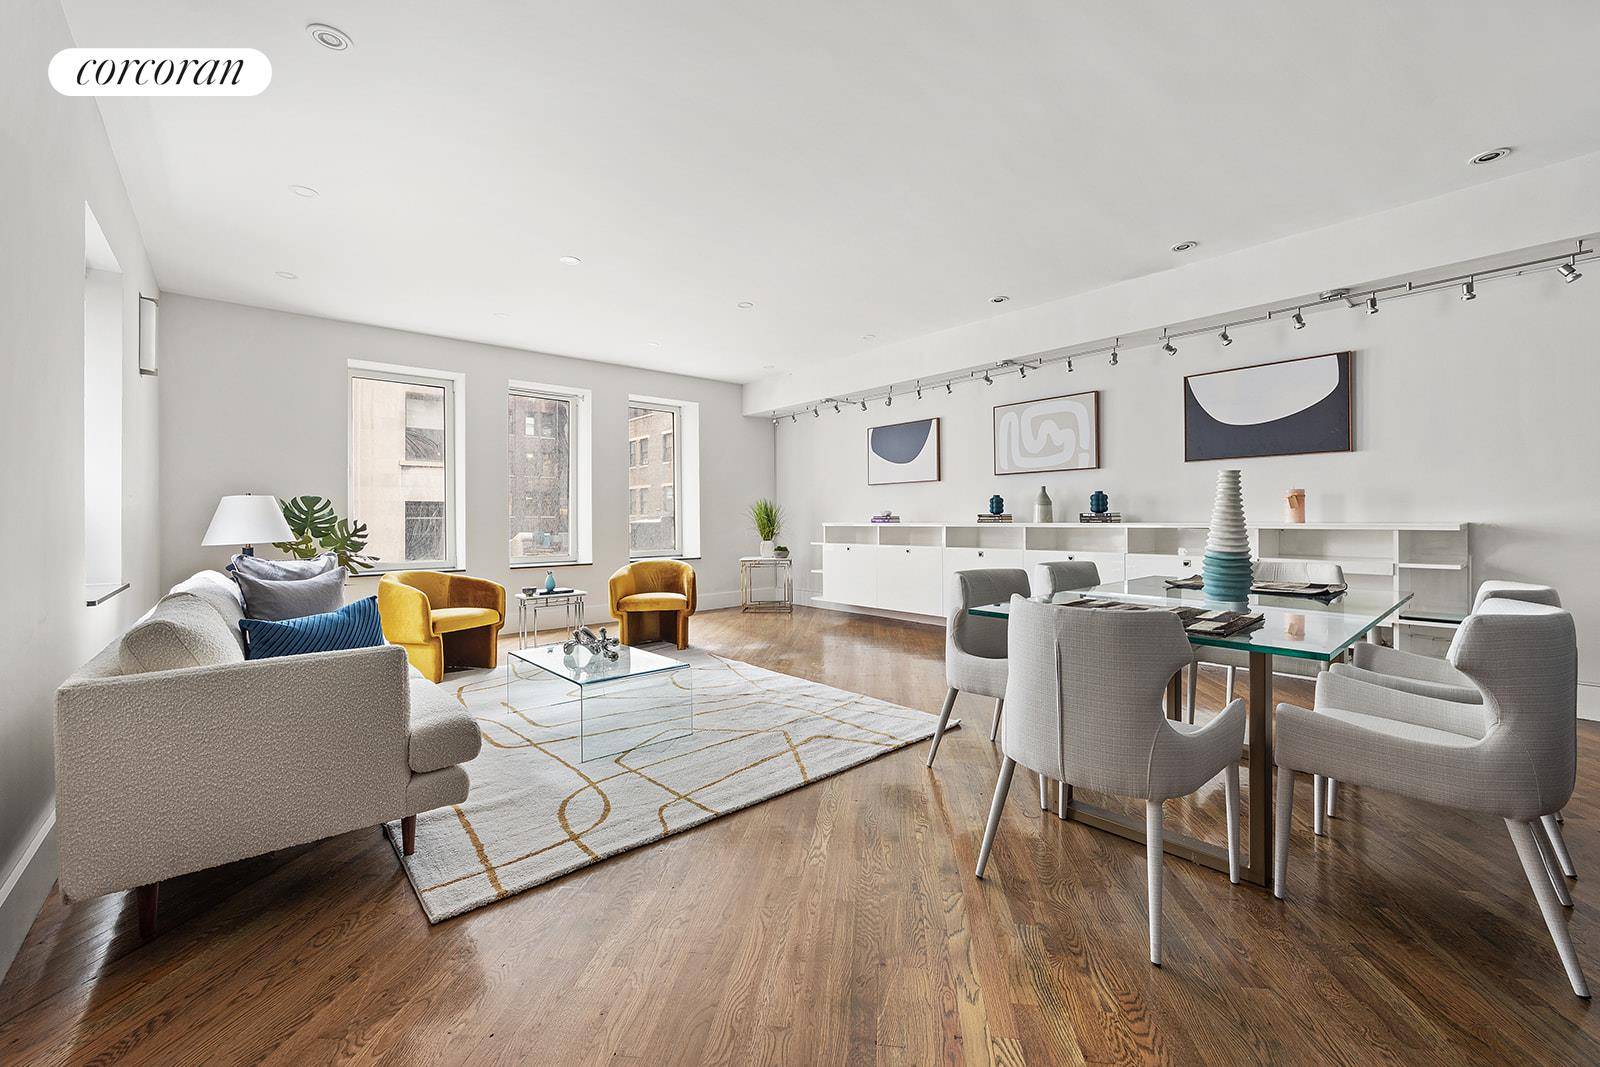 24 West 45th Street Unit 8 is A Stunning Gem in Midtown.